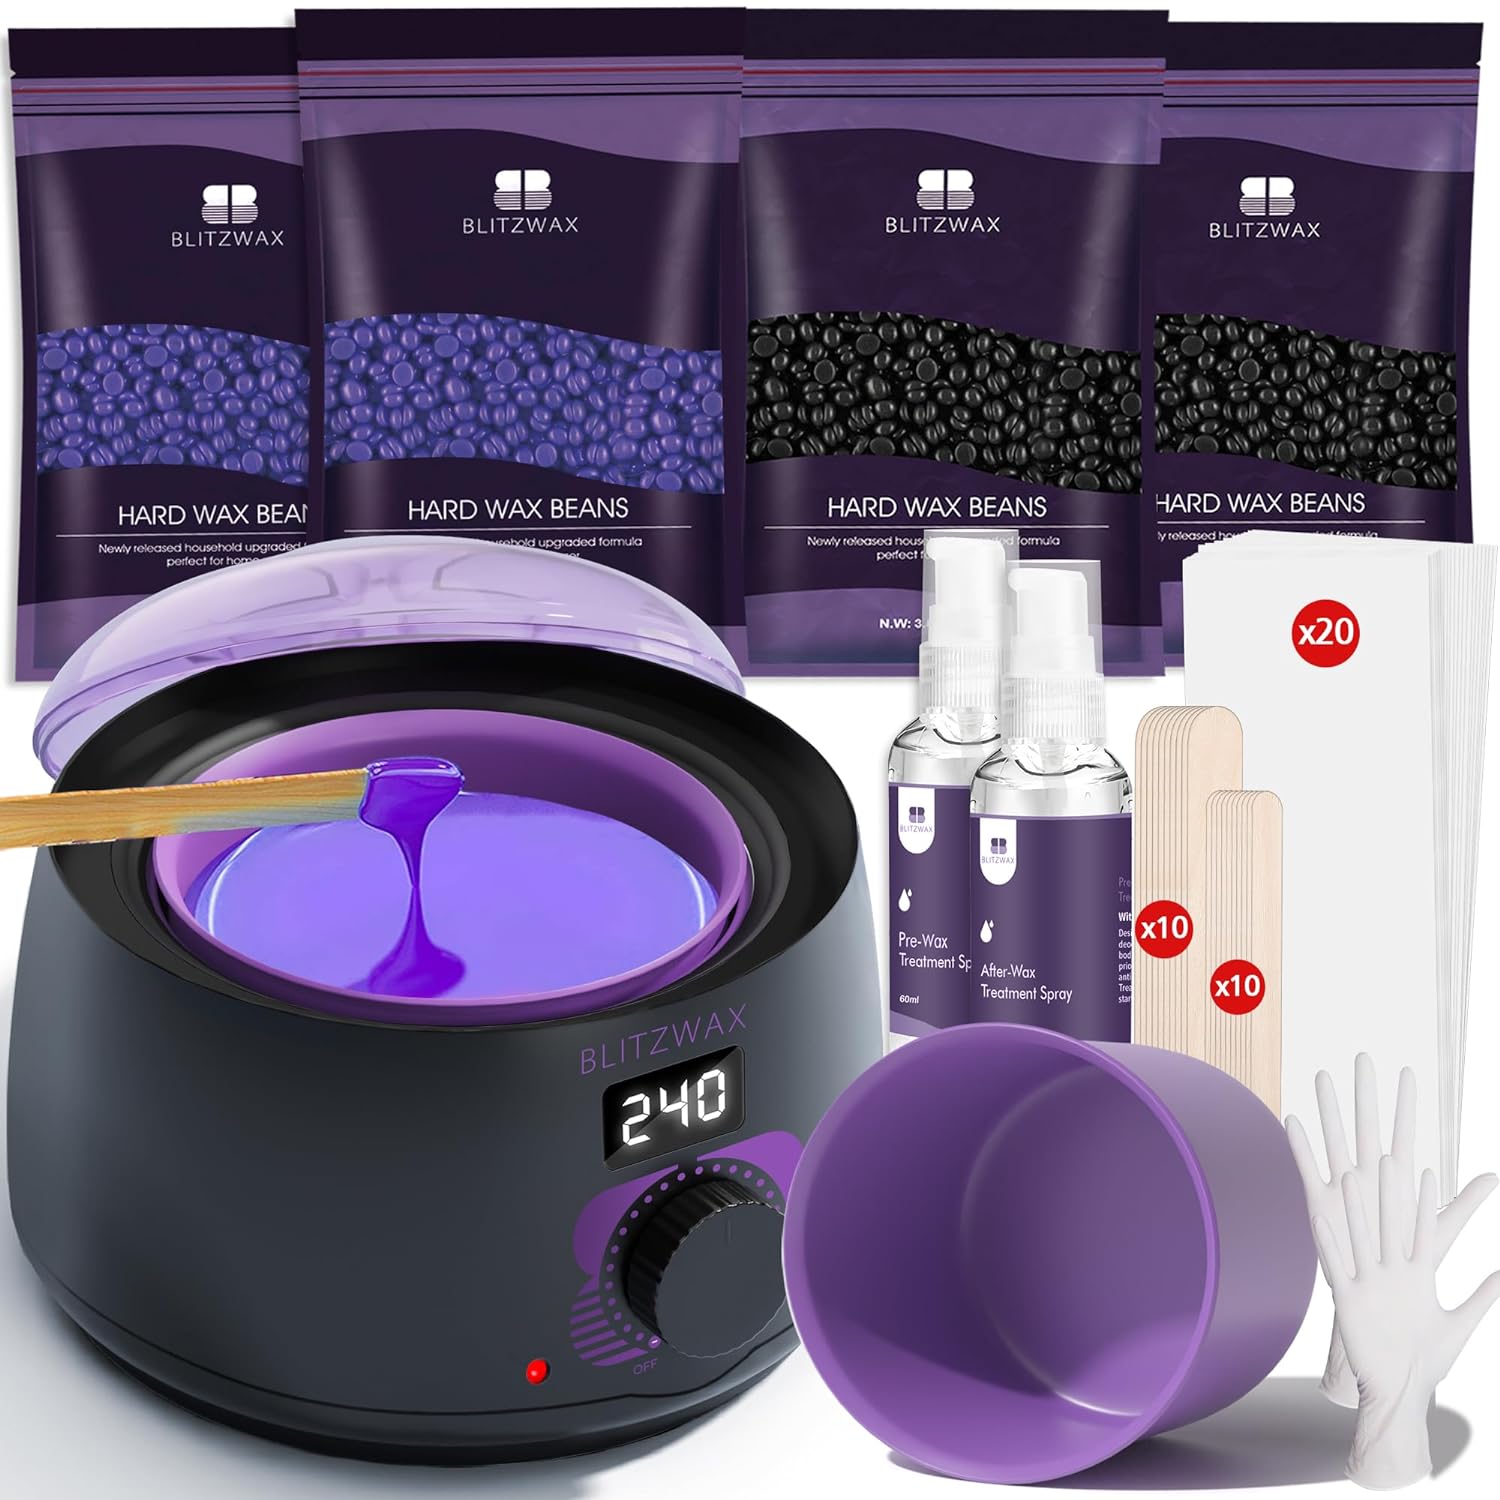 Ive been a cosmetologist for 10 years. I wanted to try something new and save money on products. I tried this out and Im satisfied. I was nervous because of how low the pot was after adding to packets of the beads. Im also very sensitive to everything. I used the manufacturers instructions but set the wax warmer to the lowest recommended setting (150). It wasnt too hot and a little goes a long way. I just cleansed the area with a natural baby wipe, let it dry, then sprayed the pre-wax spray 